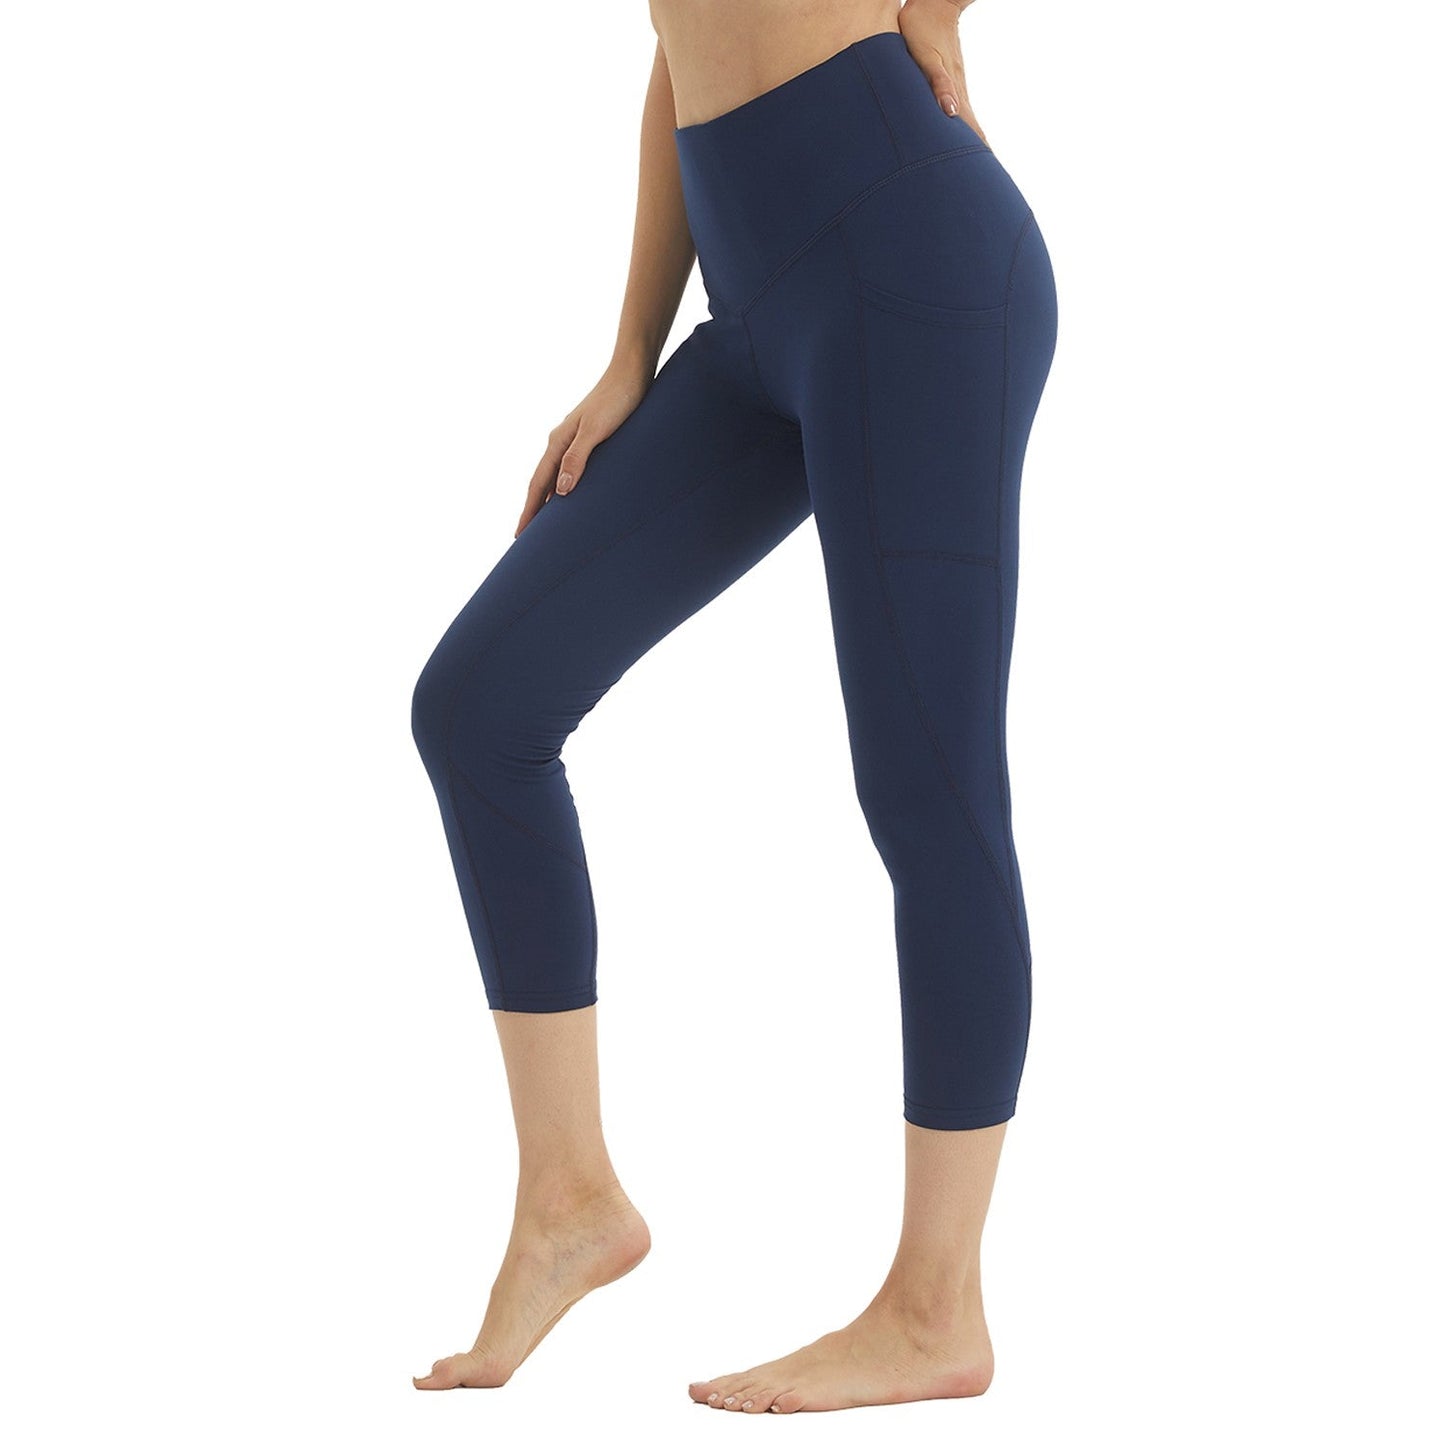 TSLA Women High Waist Yoga Pants with Pockets, Tummy Control Yoga Capris, 4  Way Stretch Capri Leggings with Pockets, Pocket Thick Contour(fyp54) -  Navy, Small in Bahrain